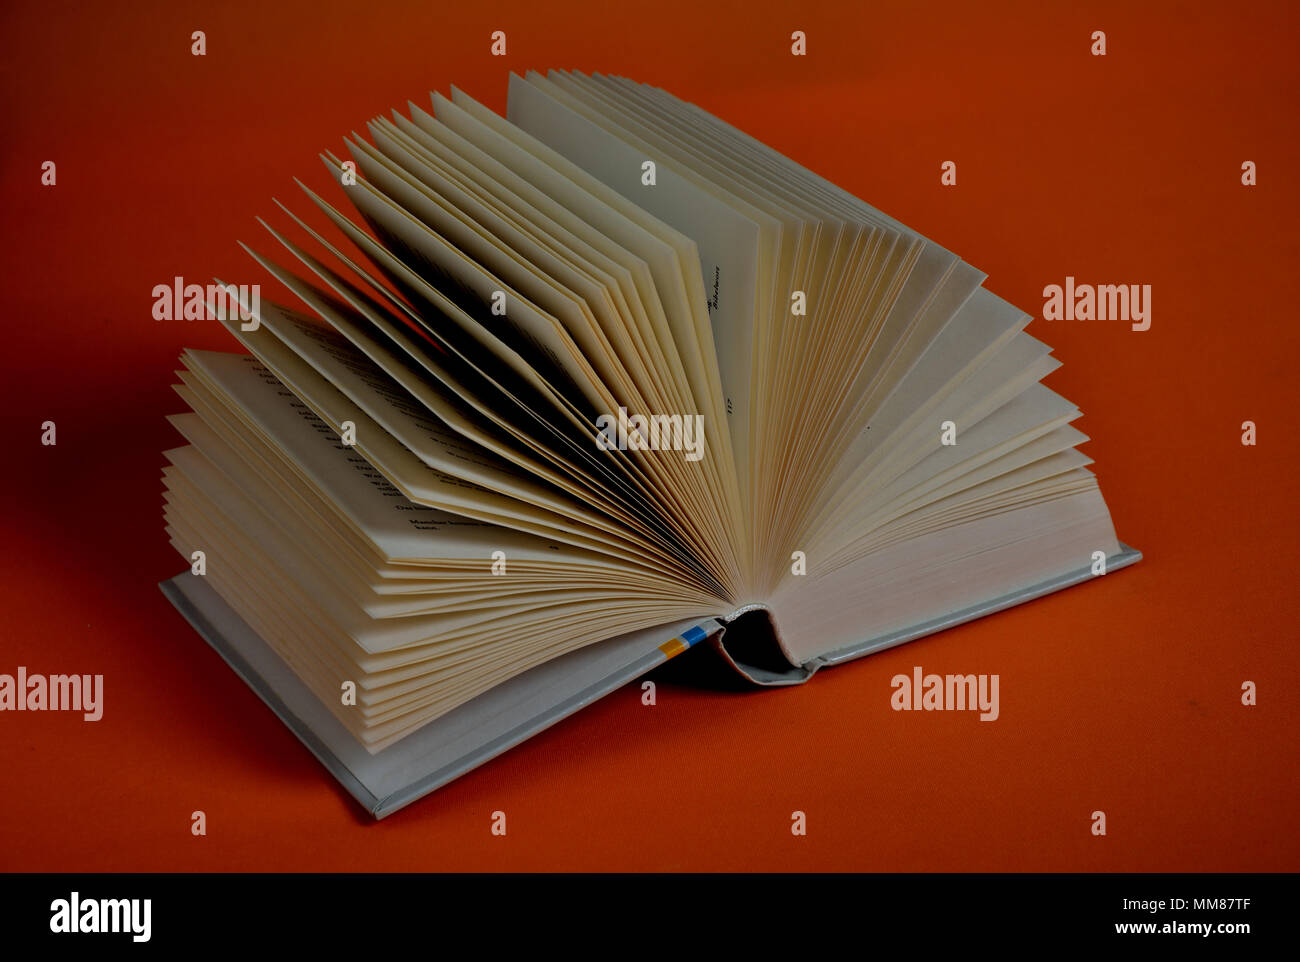 Fanned out book on orange background Stock Photo